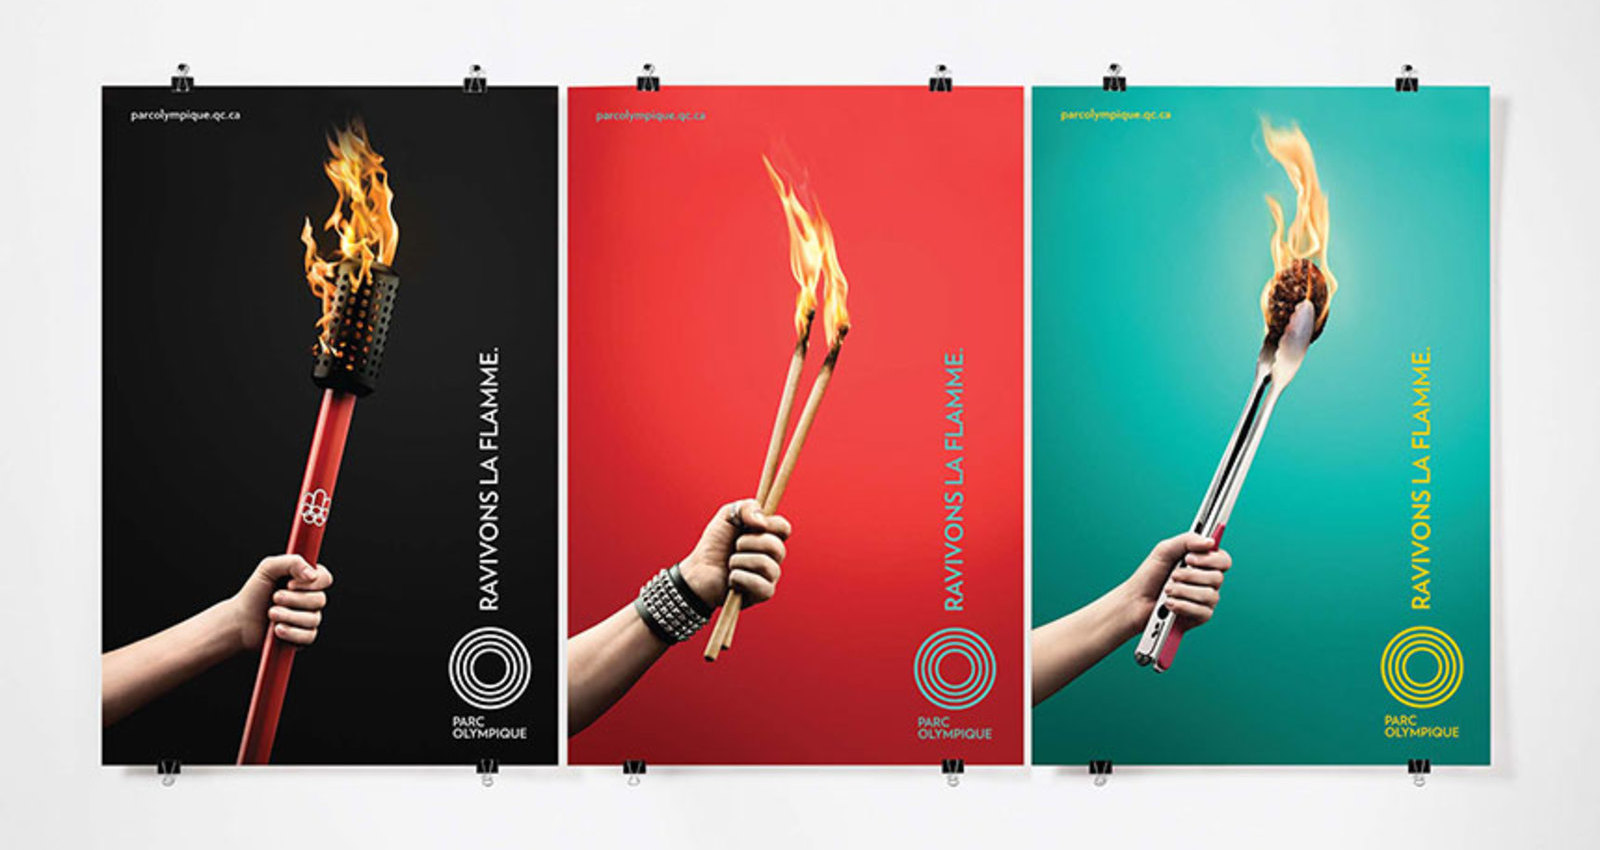 A new identity for the MontrÃ©al Olympic Park